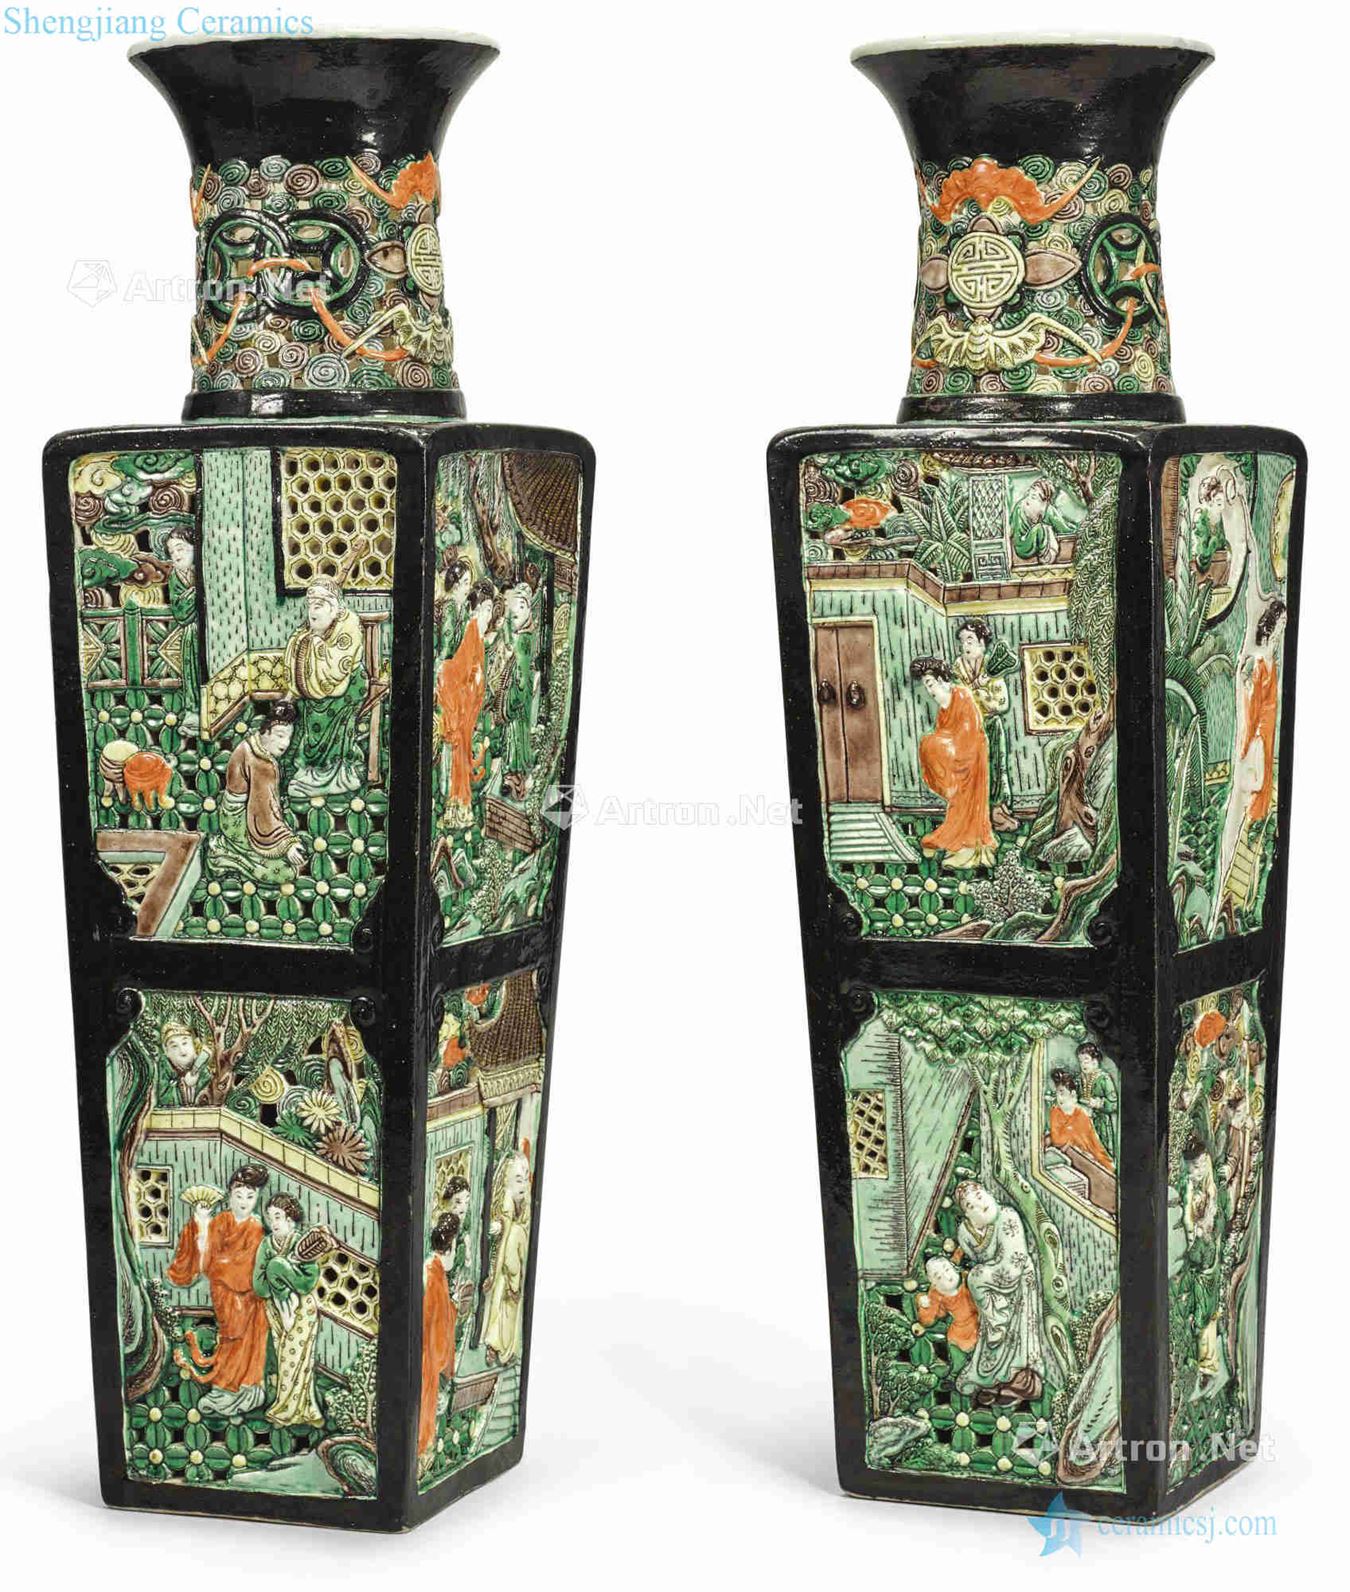 /in the late qing dynasty in the early 20th century Ink colorful medallion to hollow out relief figure vase stories of west chamber (a)